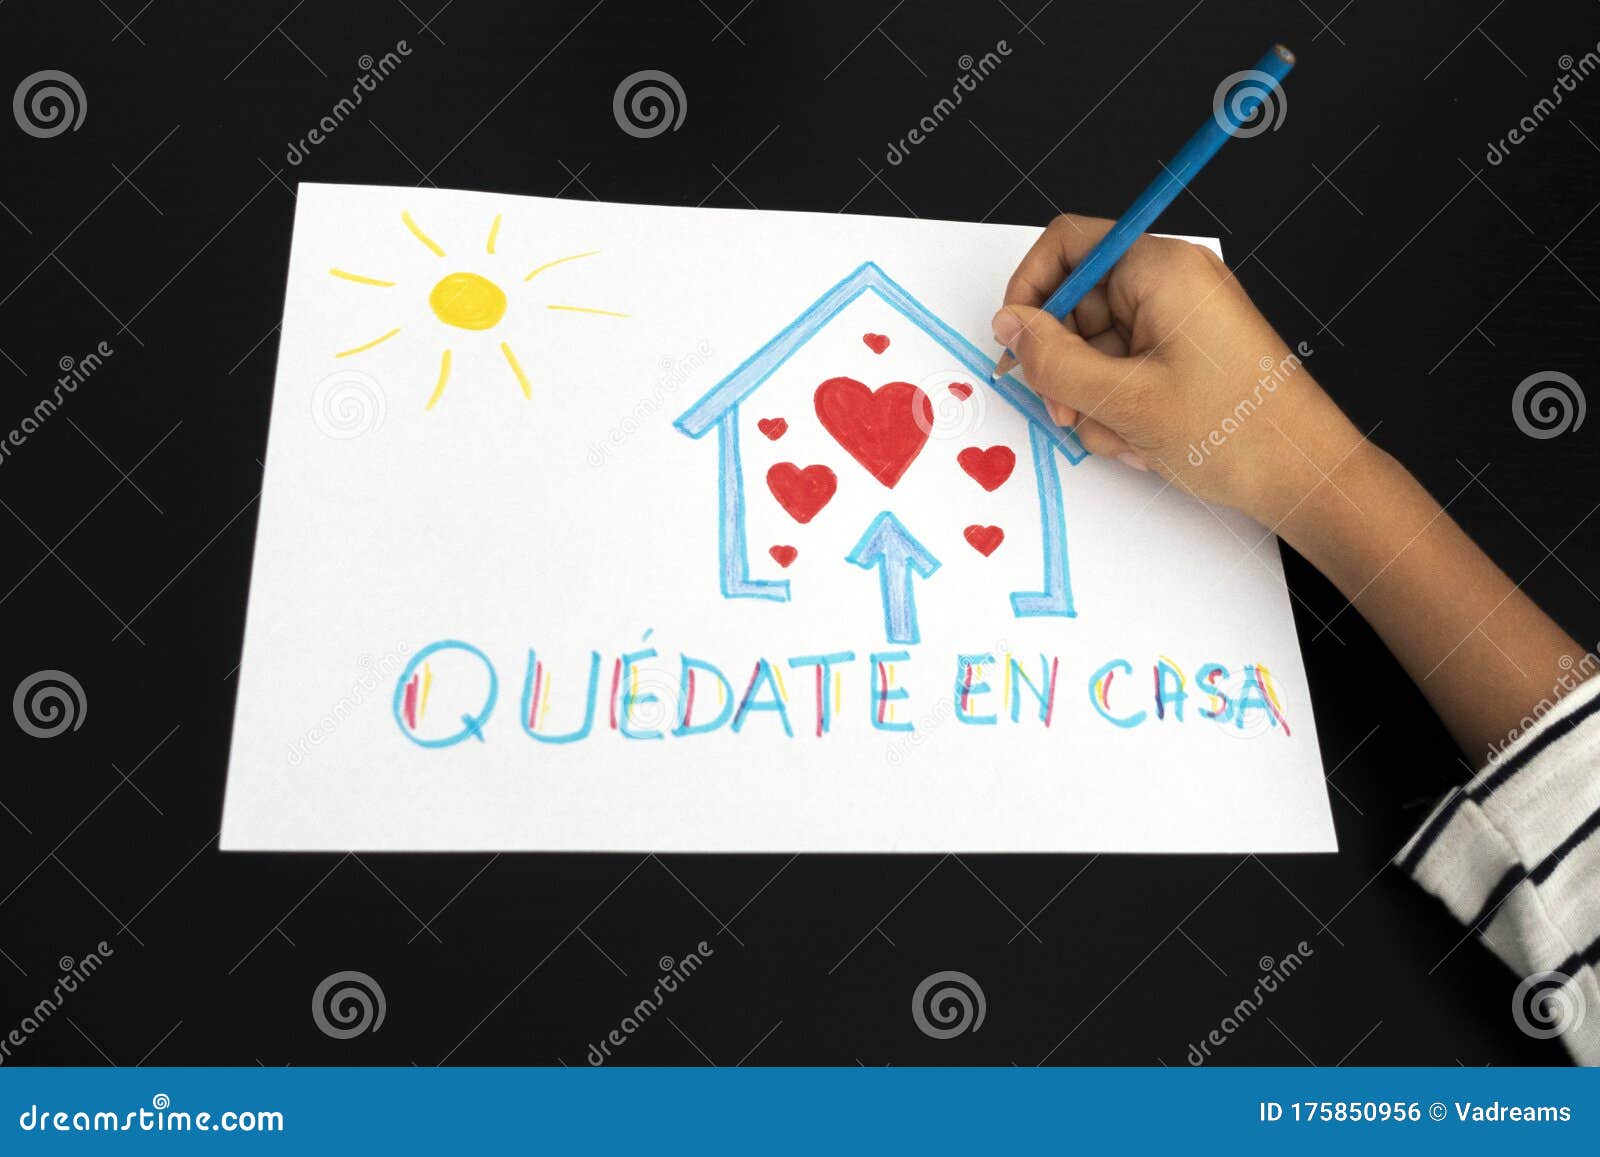 coronavirus quarantine in spain. kid hand draw picture with spanish words quedate en casa - stay at home